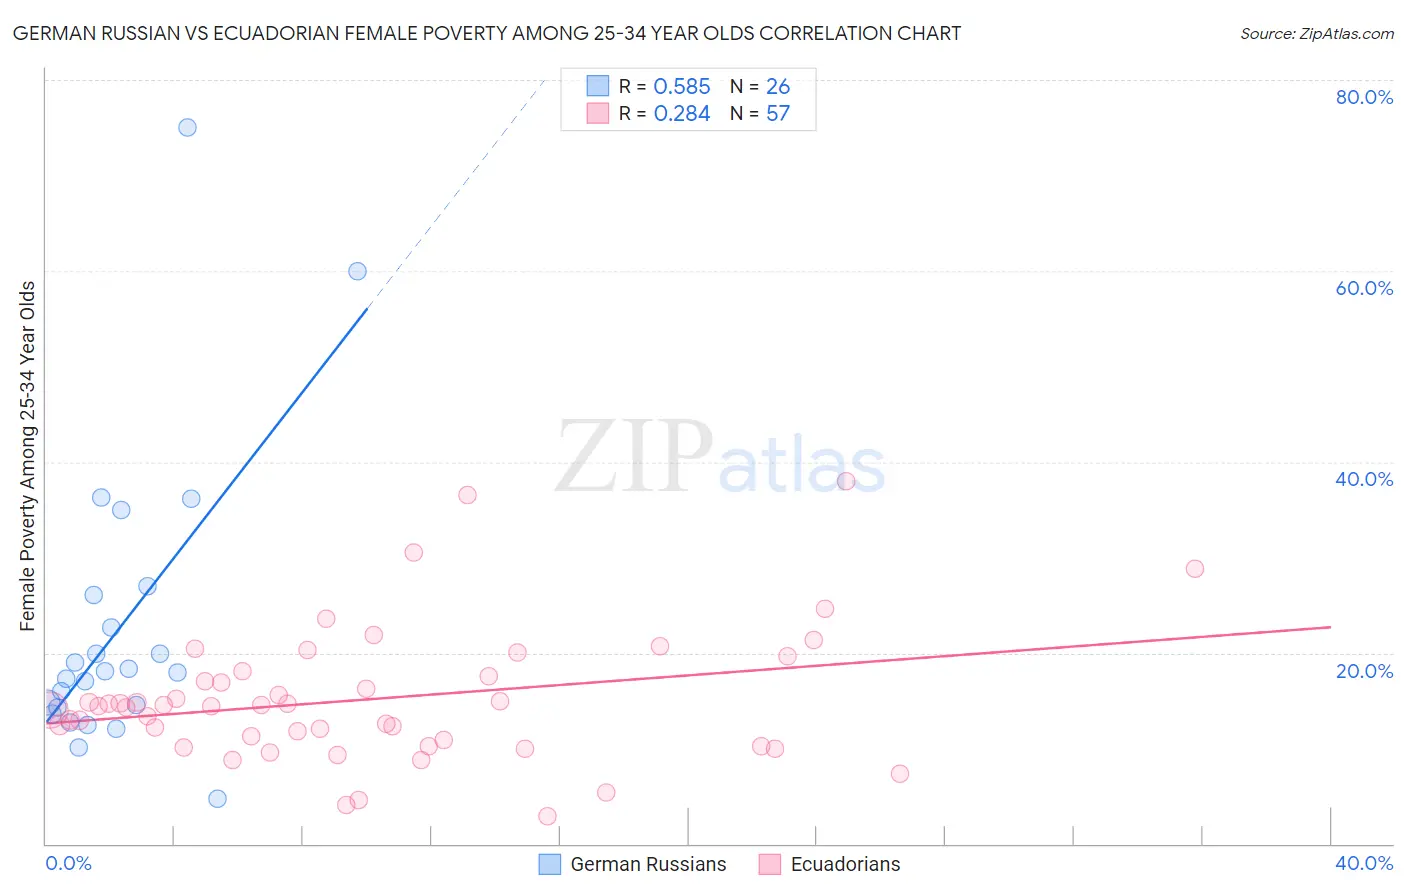 German Russian vs Ecuadorian Female Poverty Among 25-34 Year Olds